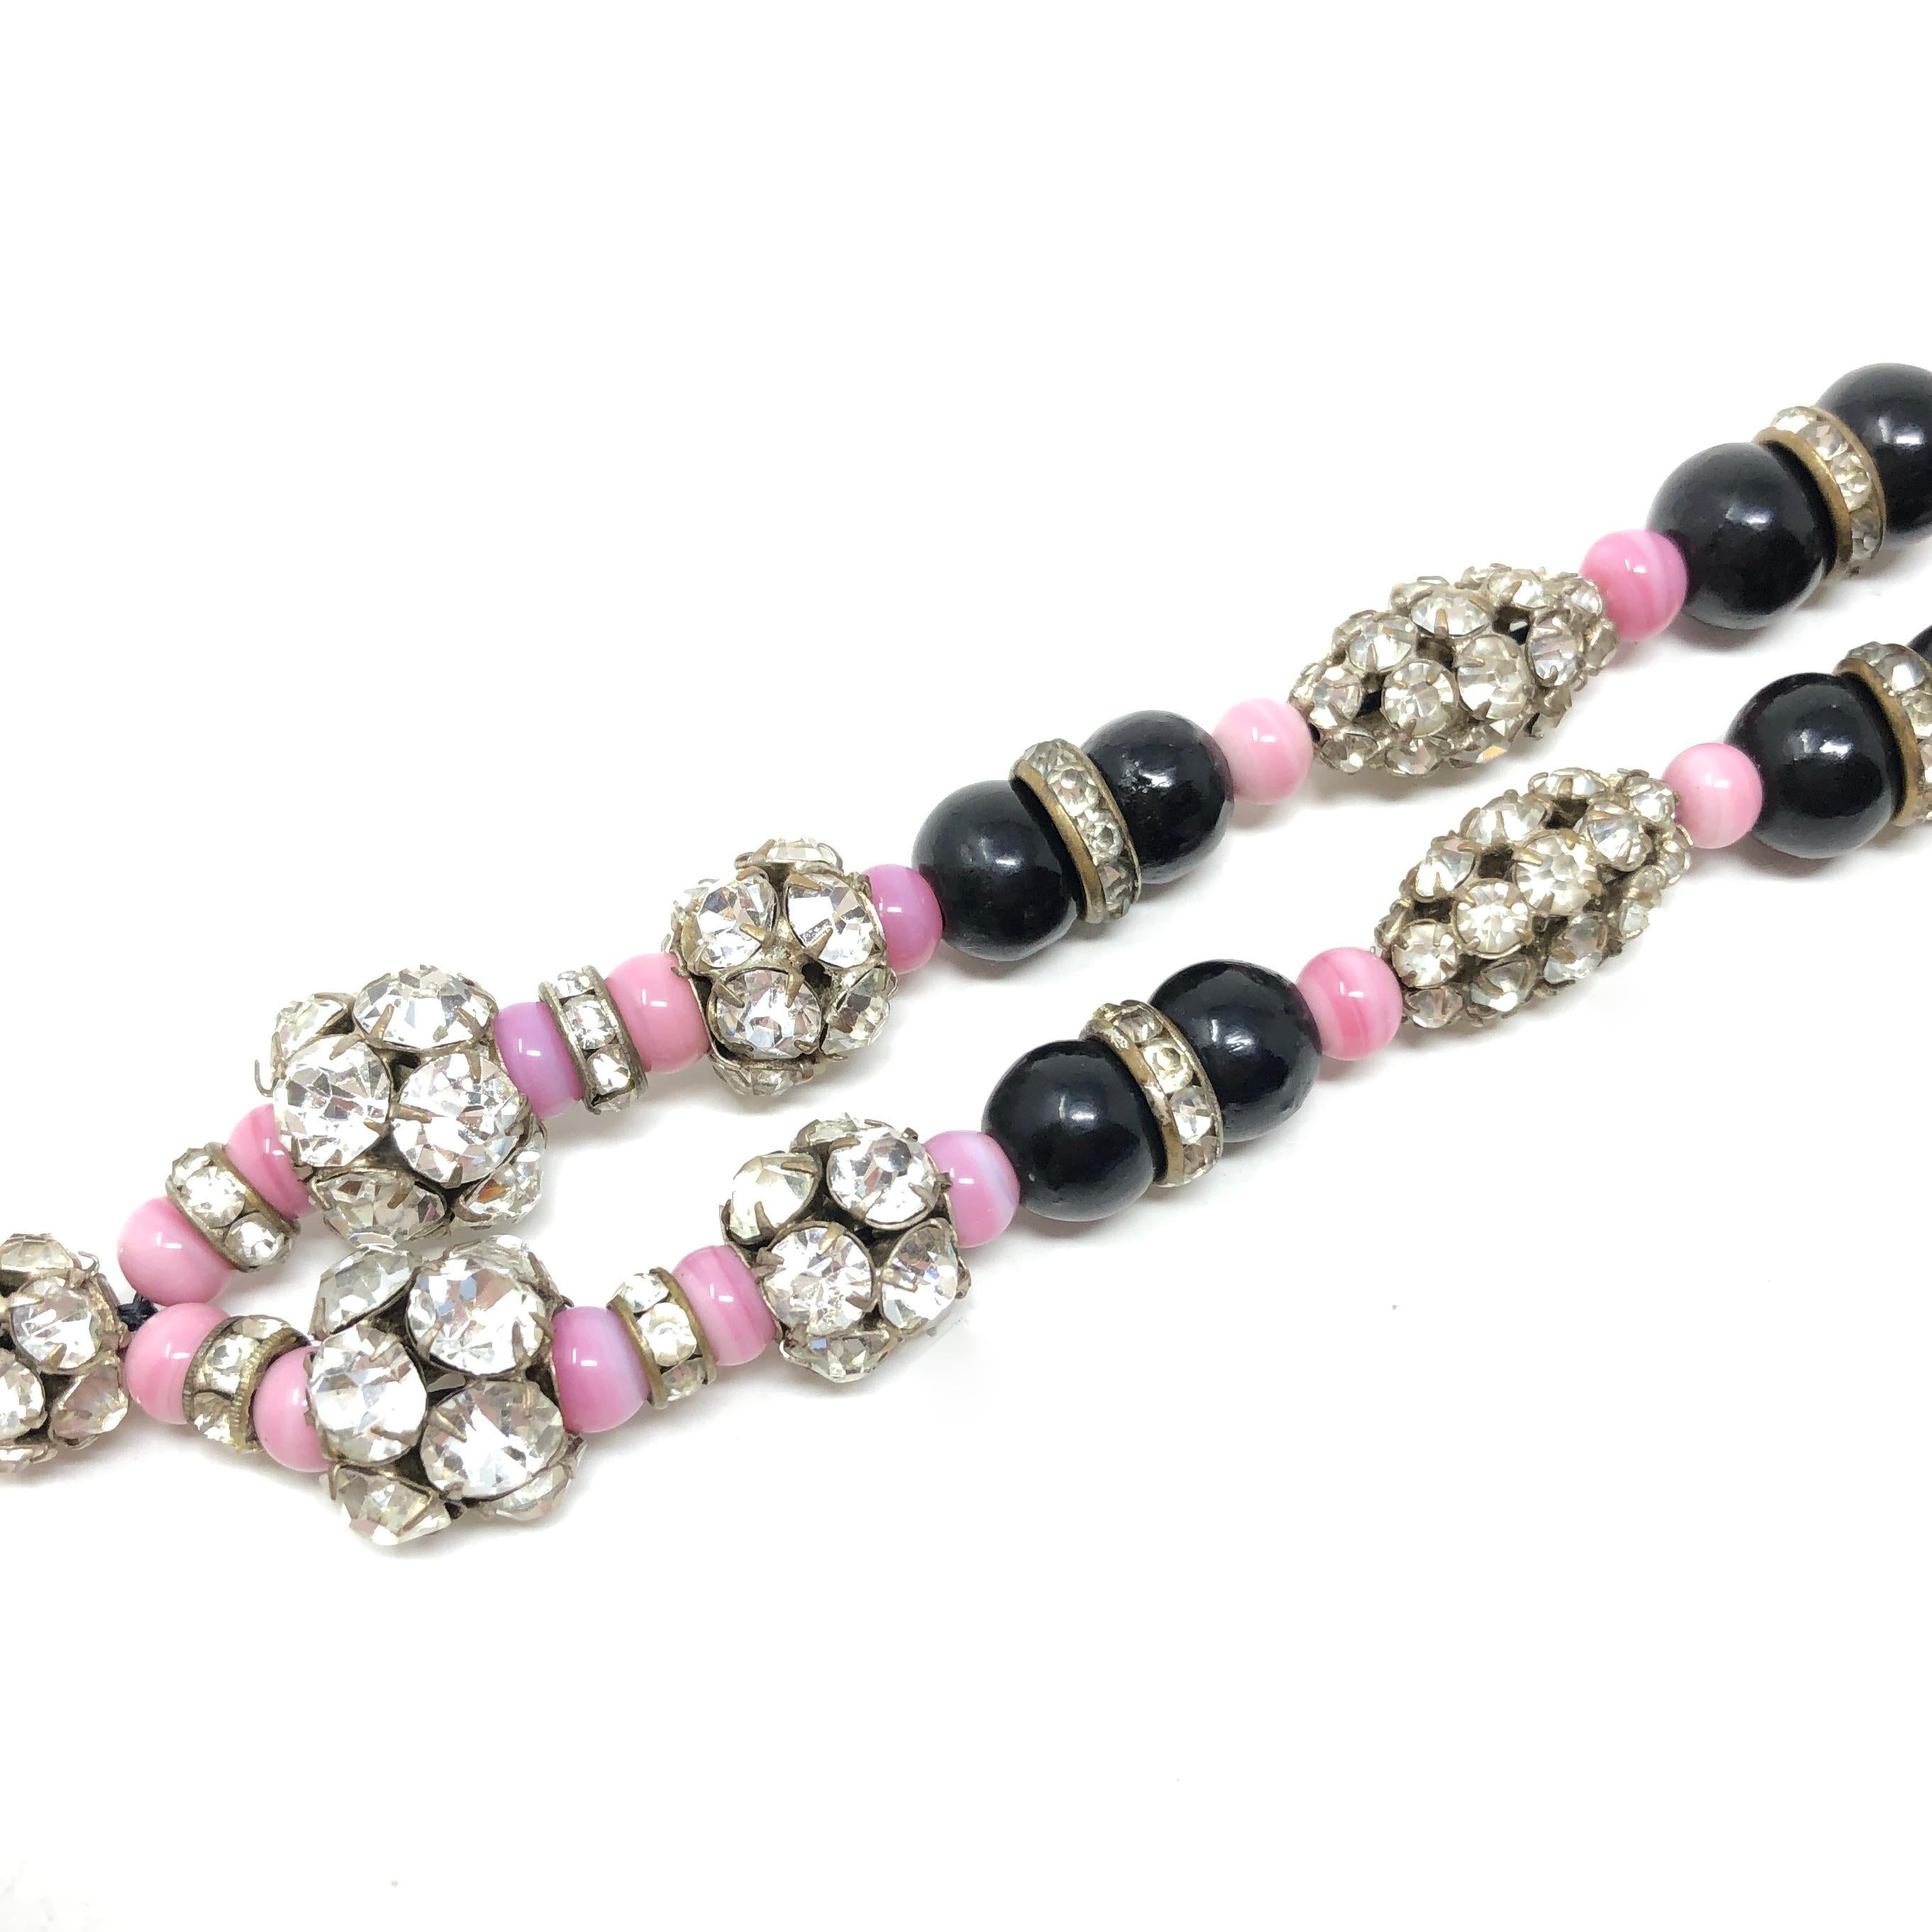 1920s Art Deco Pink and Black Glass Bead Rhinestone Vintage Flapper Necklace For Sale 3